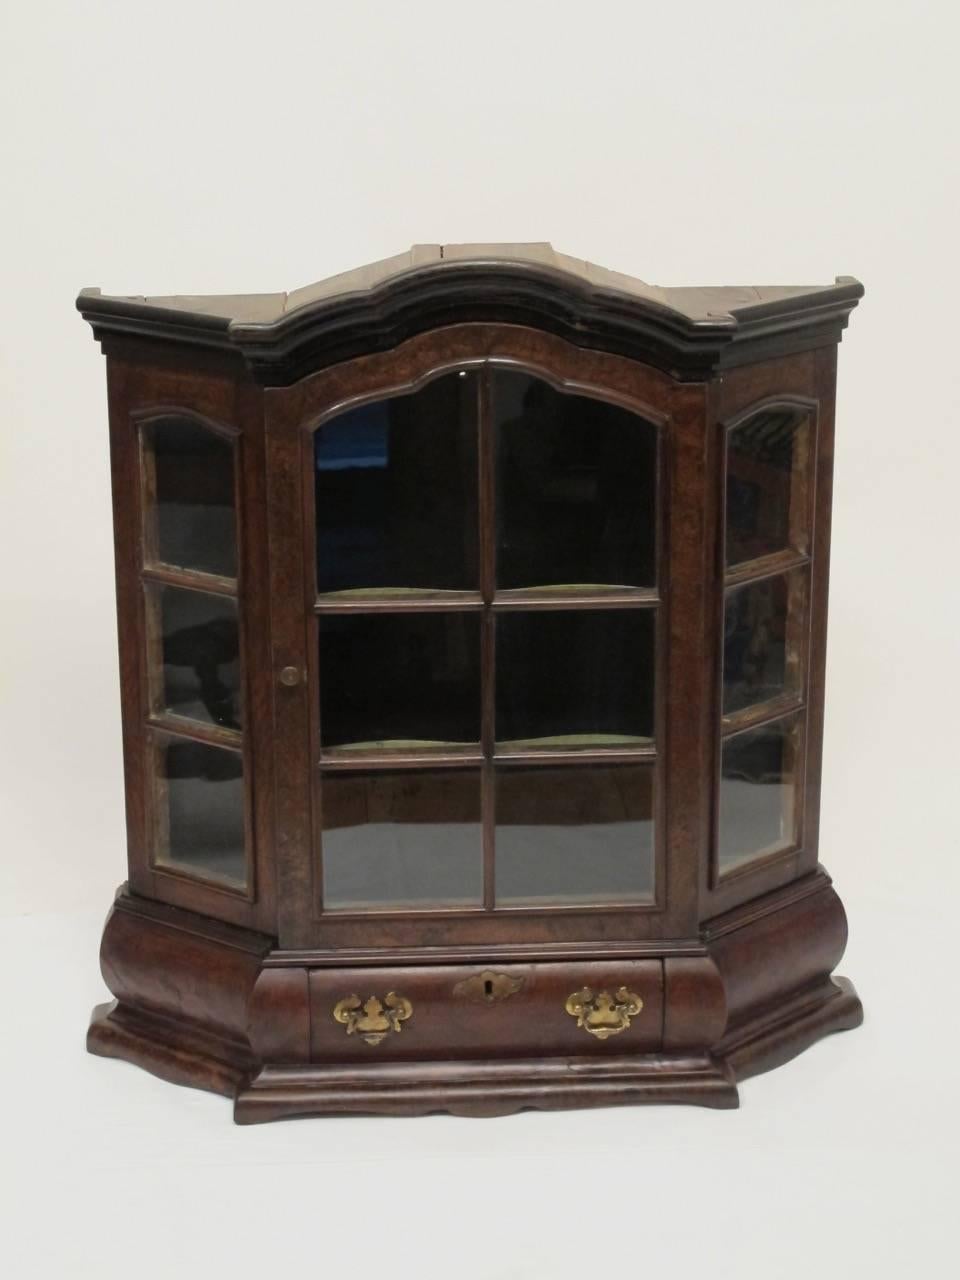 A beautiful quality and perfect scale Dutch made burl walnut and walnut vitrine or cabinet (likely a cabinet maker or apprentice model). Cabinet has painted interior with two shelves and a single drawer. Netherlands, circa 1800.